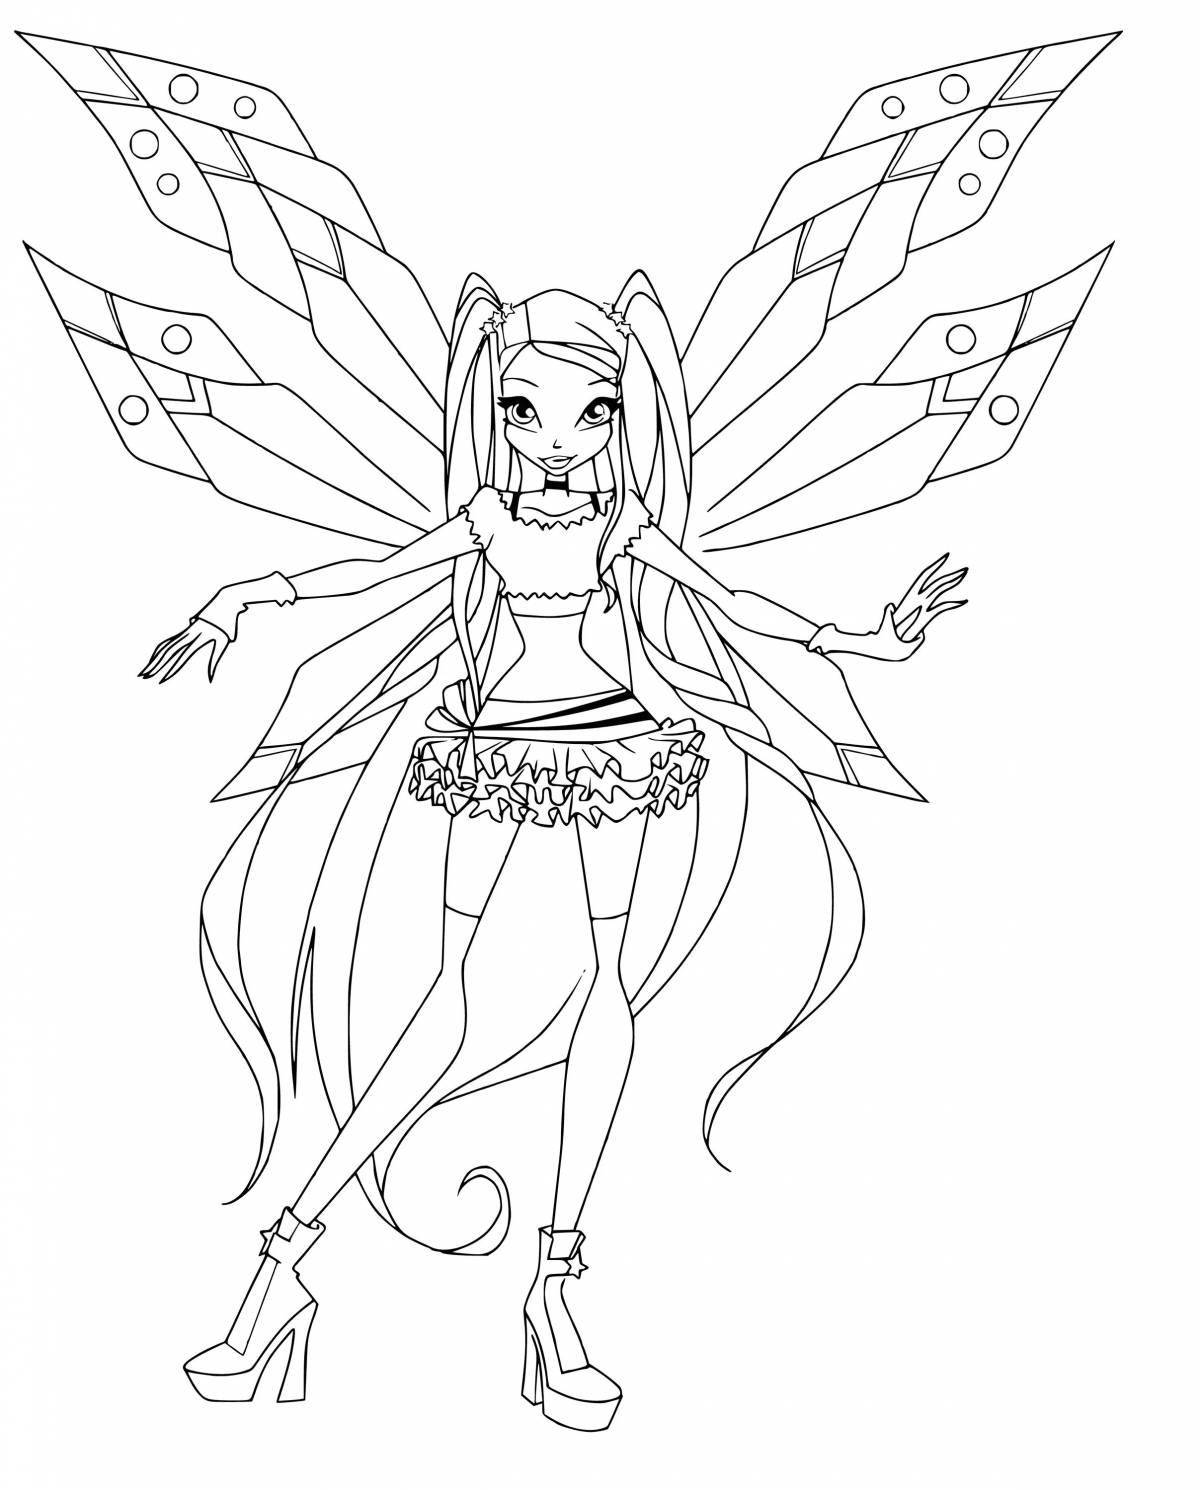 Great winx stella coloring page